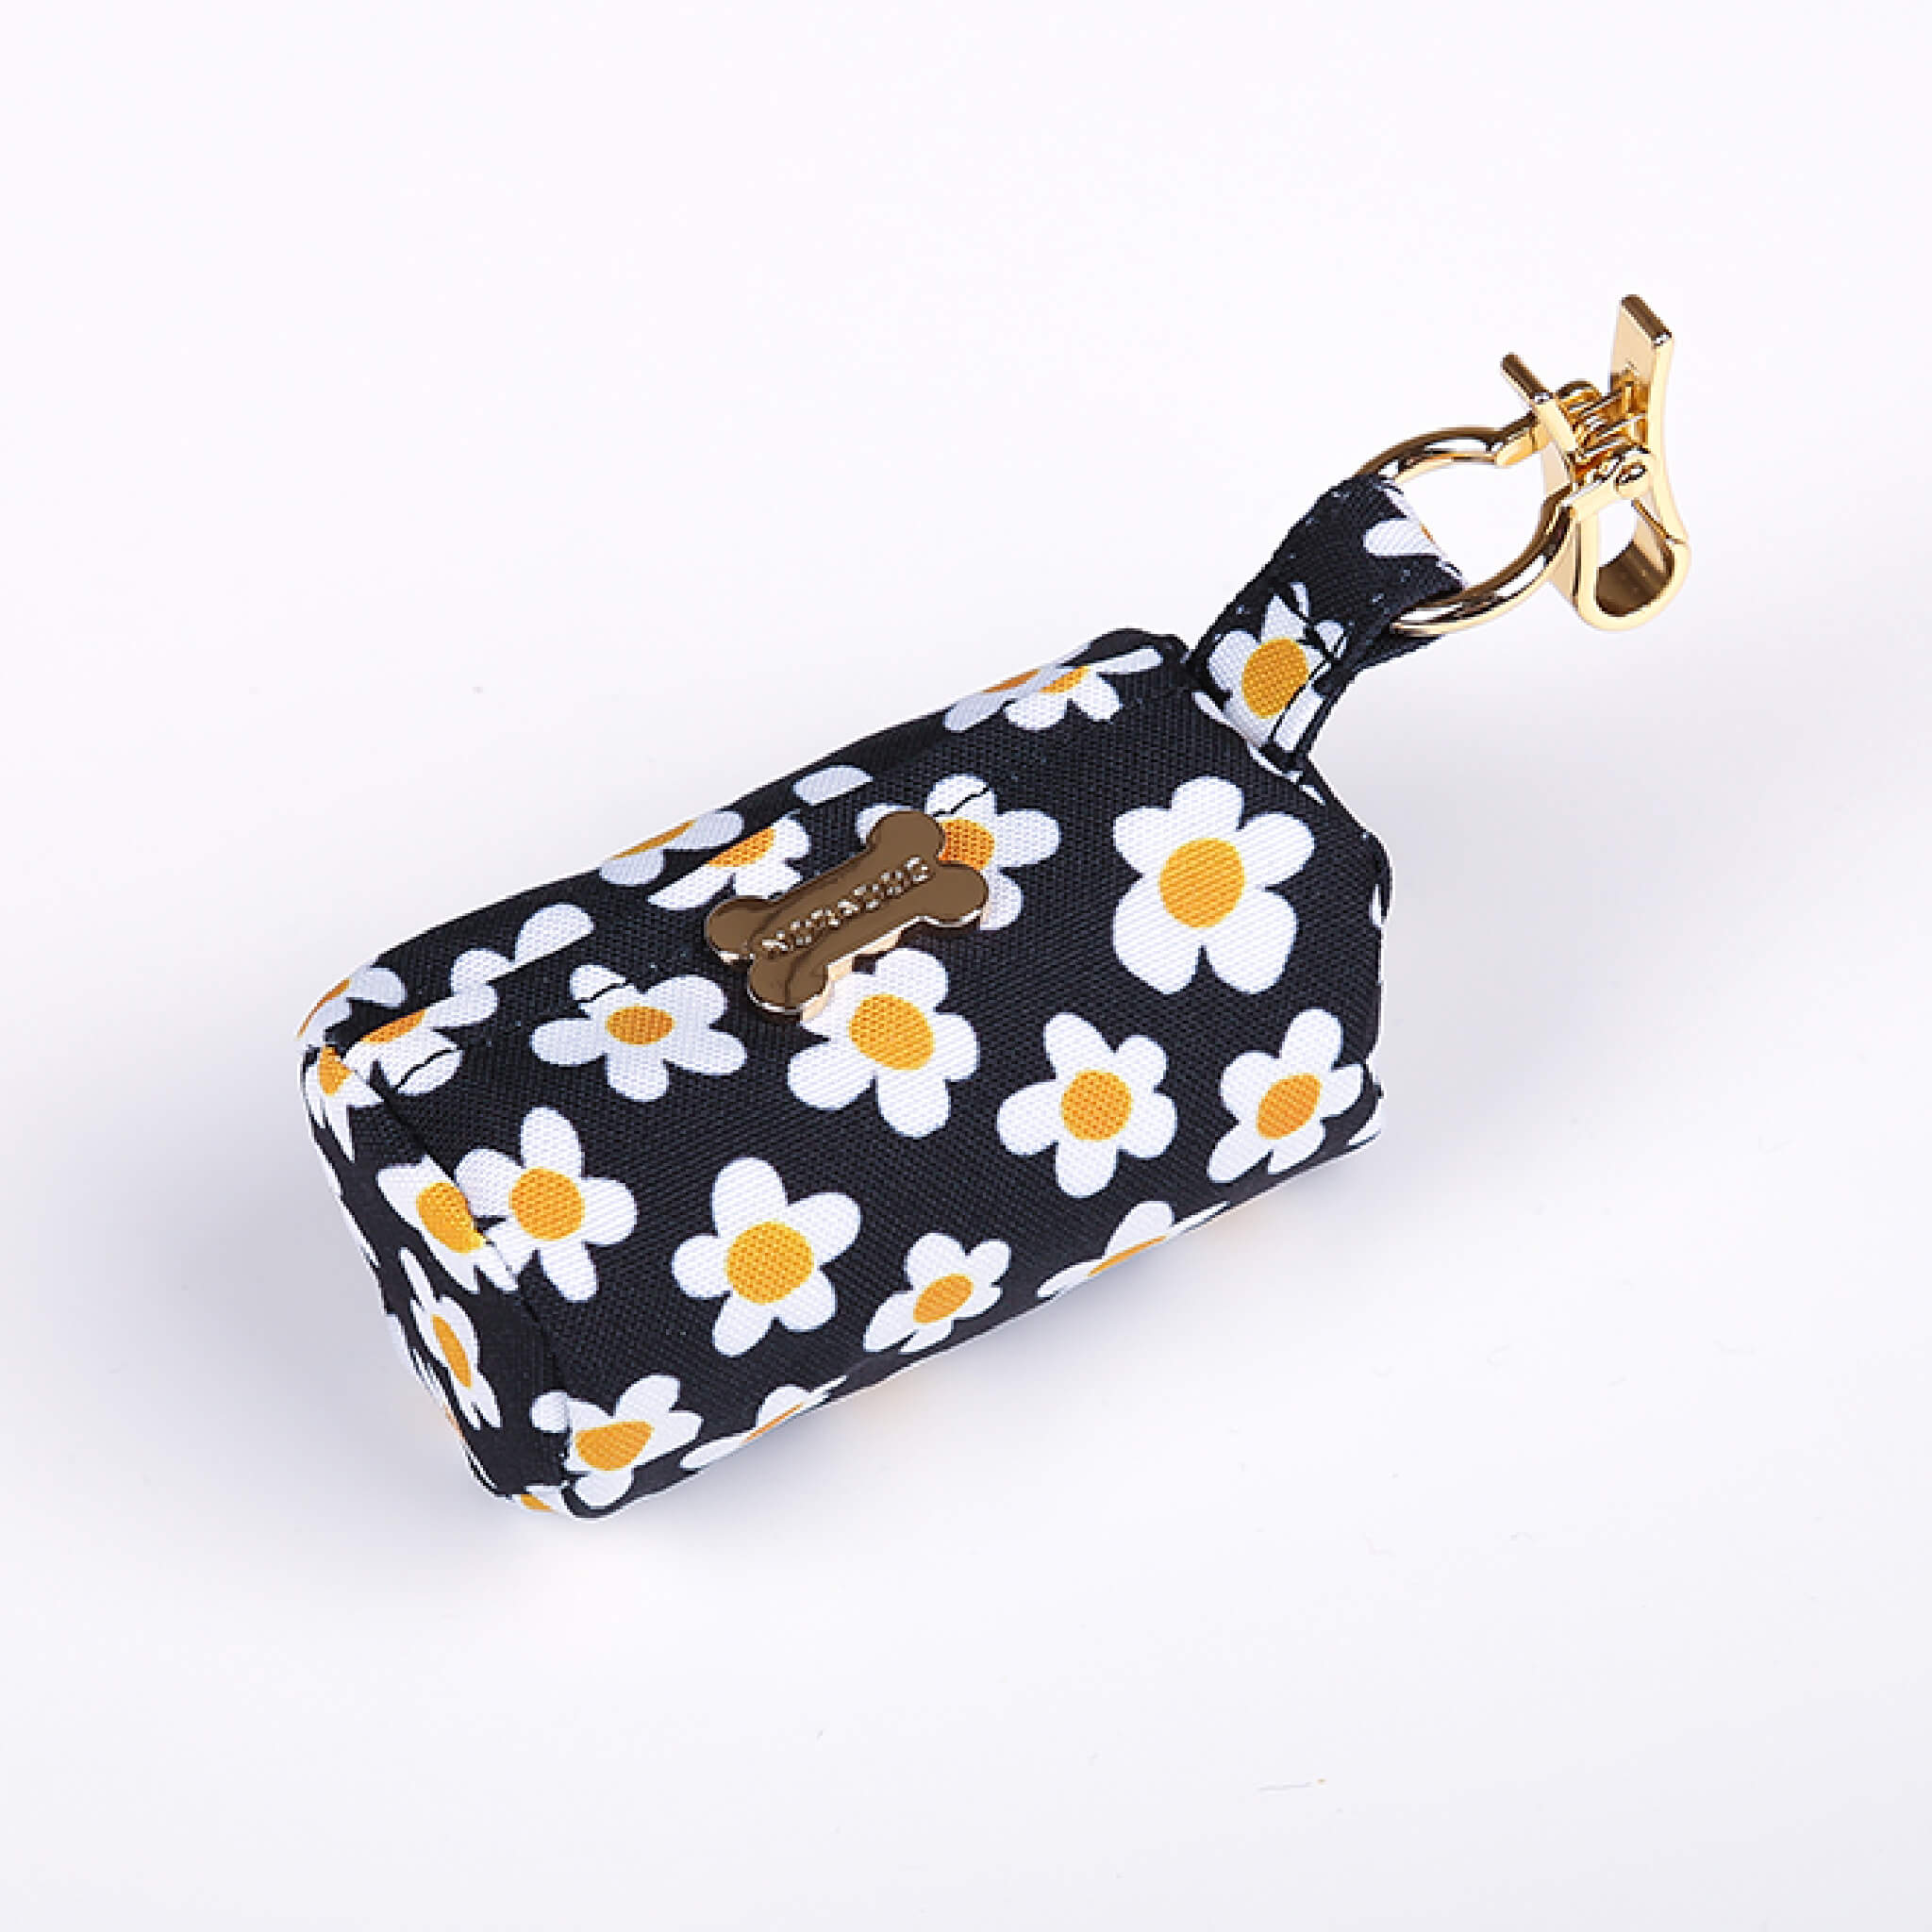 Poop bag holder with a daisy pattern.